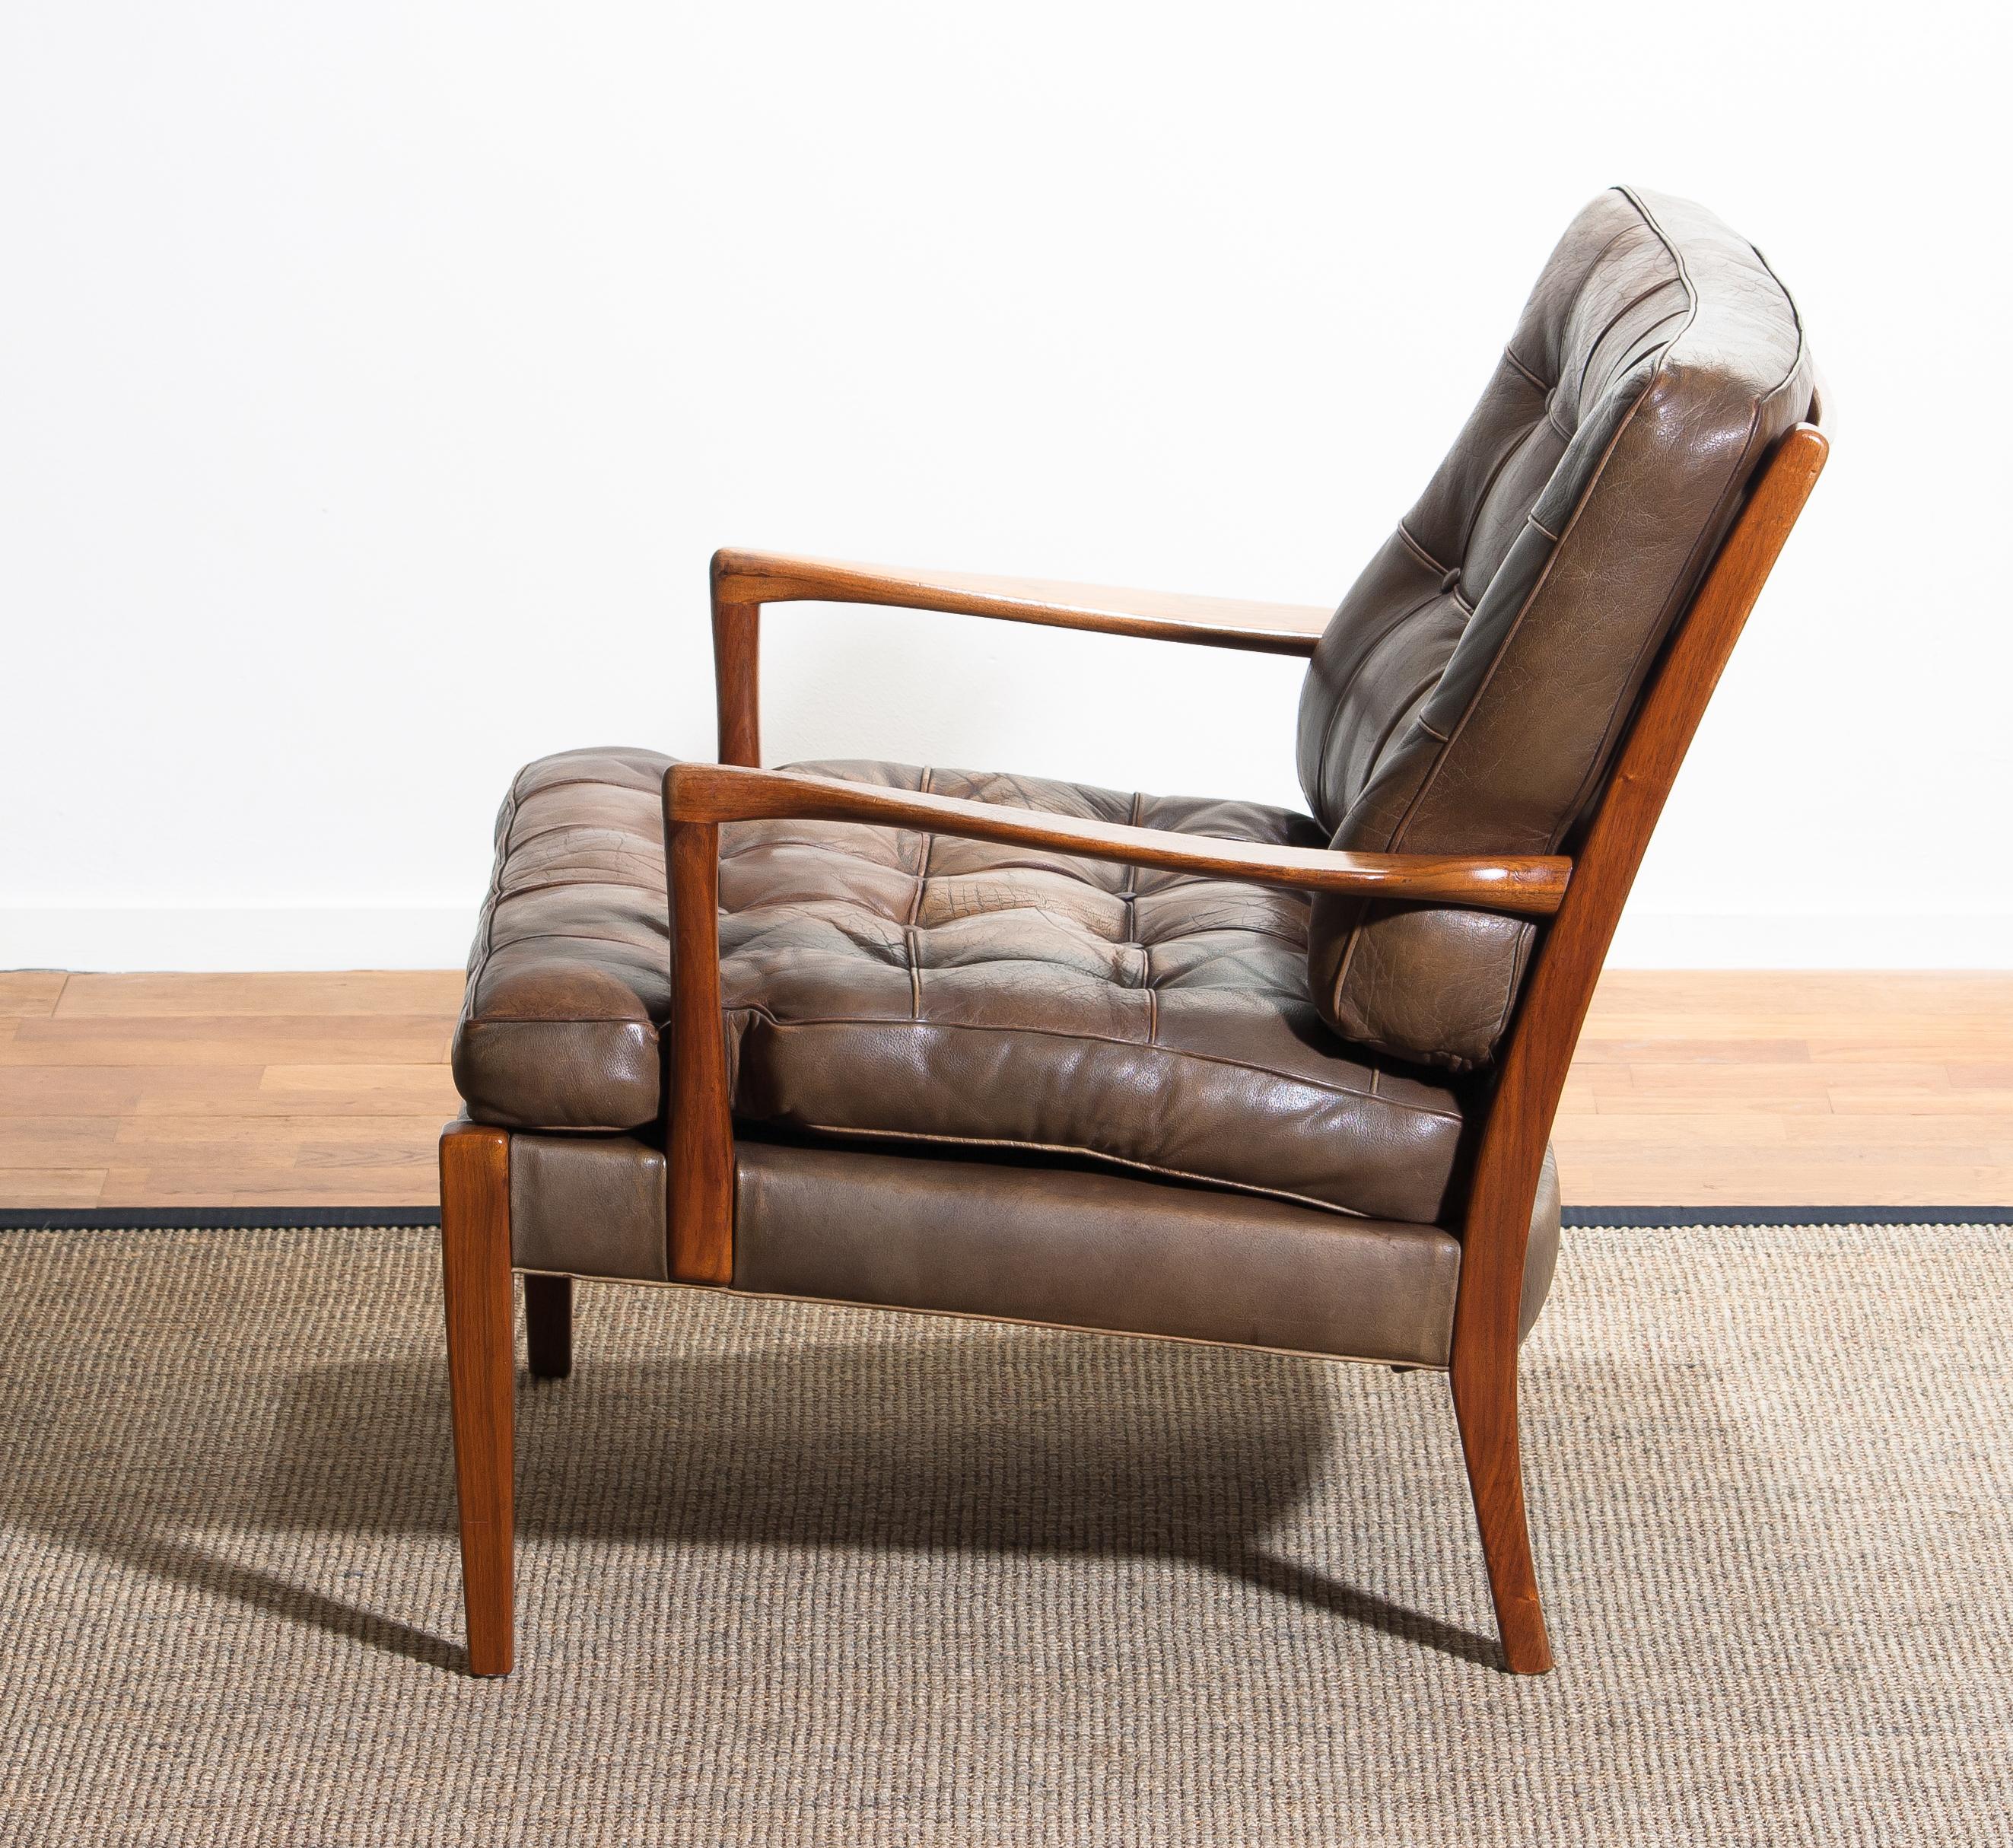 1960s Walnut / Leather Easy / Lounge Chair Model 